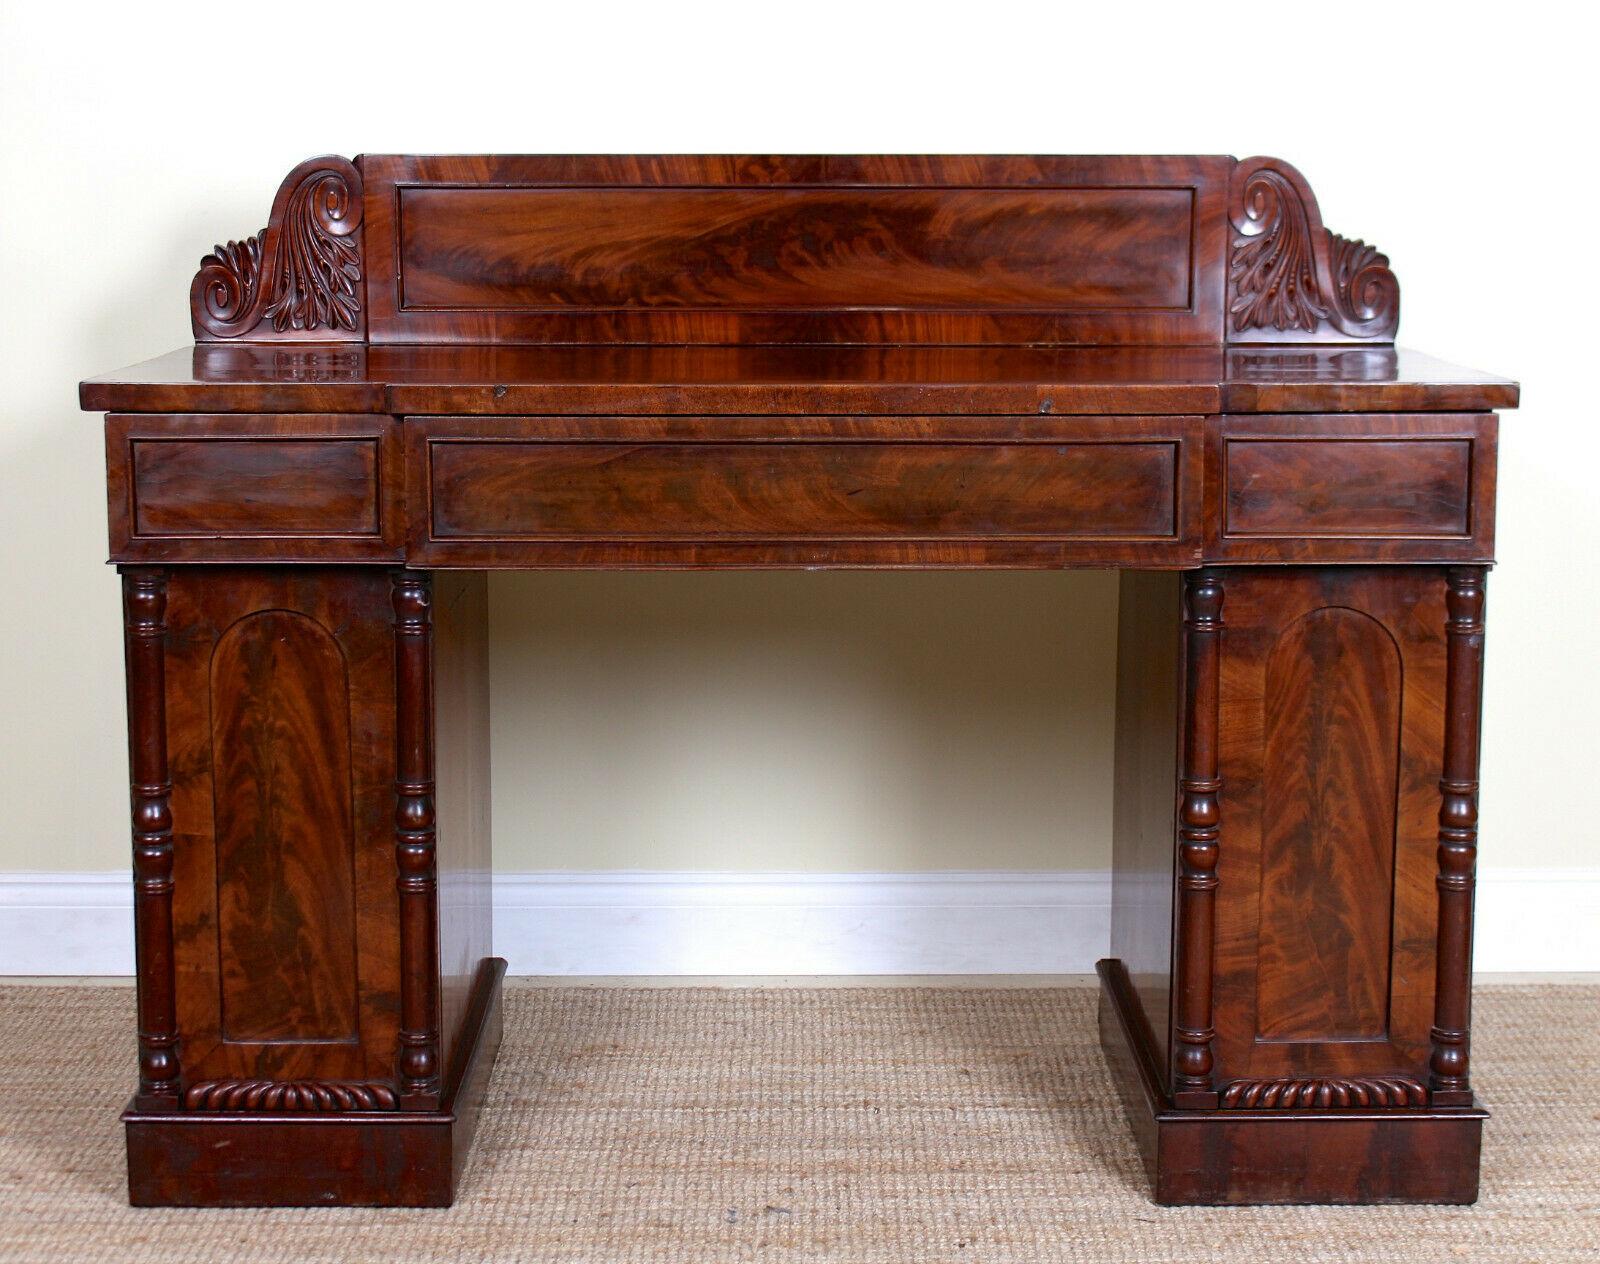 English Regency Mahogany Sideboard Early 19th Century Twin Pedestal Credenza In Good Condition For Sale In Newcastle upon Tyne, GB